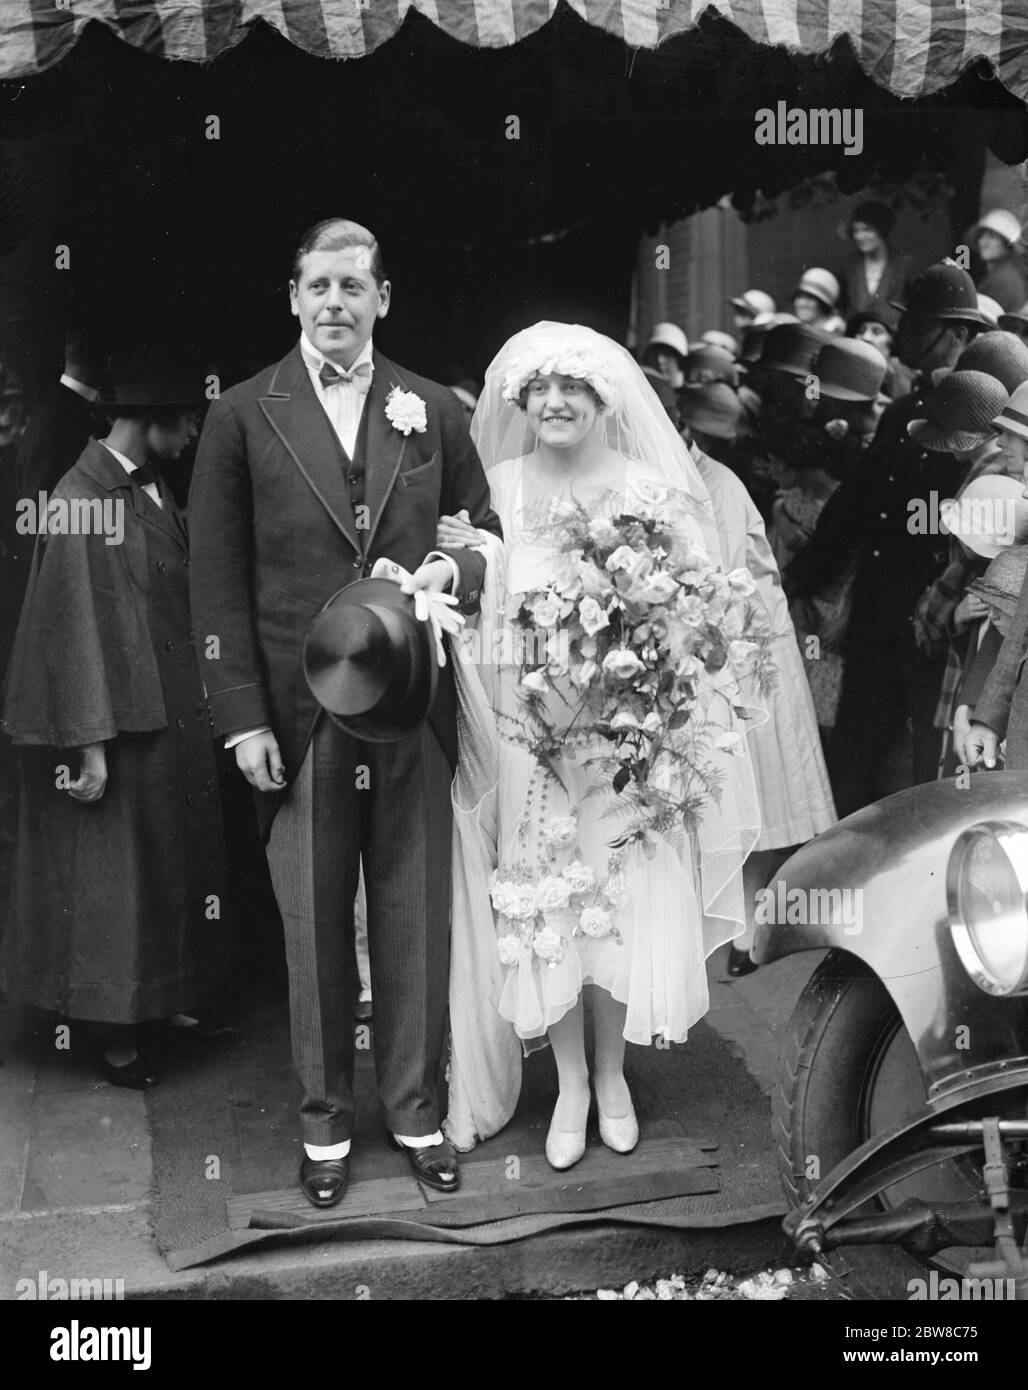 Sir Alfred Monds ' daughter weds . Sir Alfred and Lady Mond 's daughter Miss Nora Mond and Mr John Buckland had a pretty White rose wedding on Saturday at Holy Trinity , Sloane Square . Bride and bridegroom leaving the Church . 24 June 1926 Stock Photo